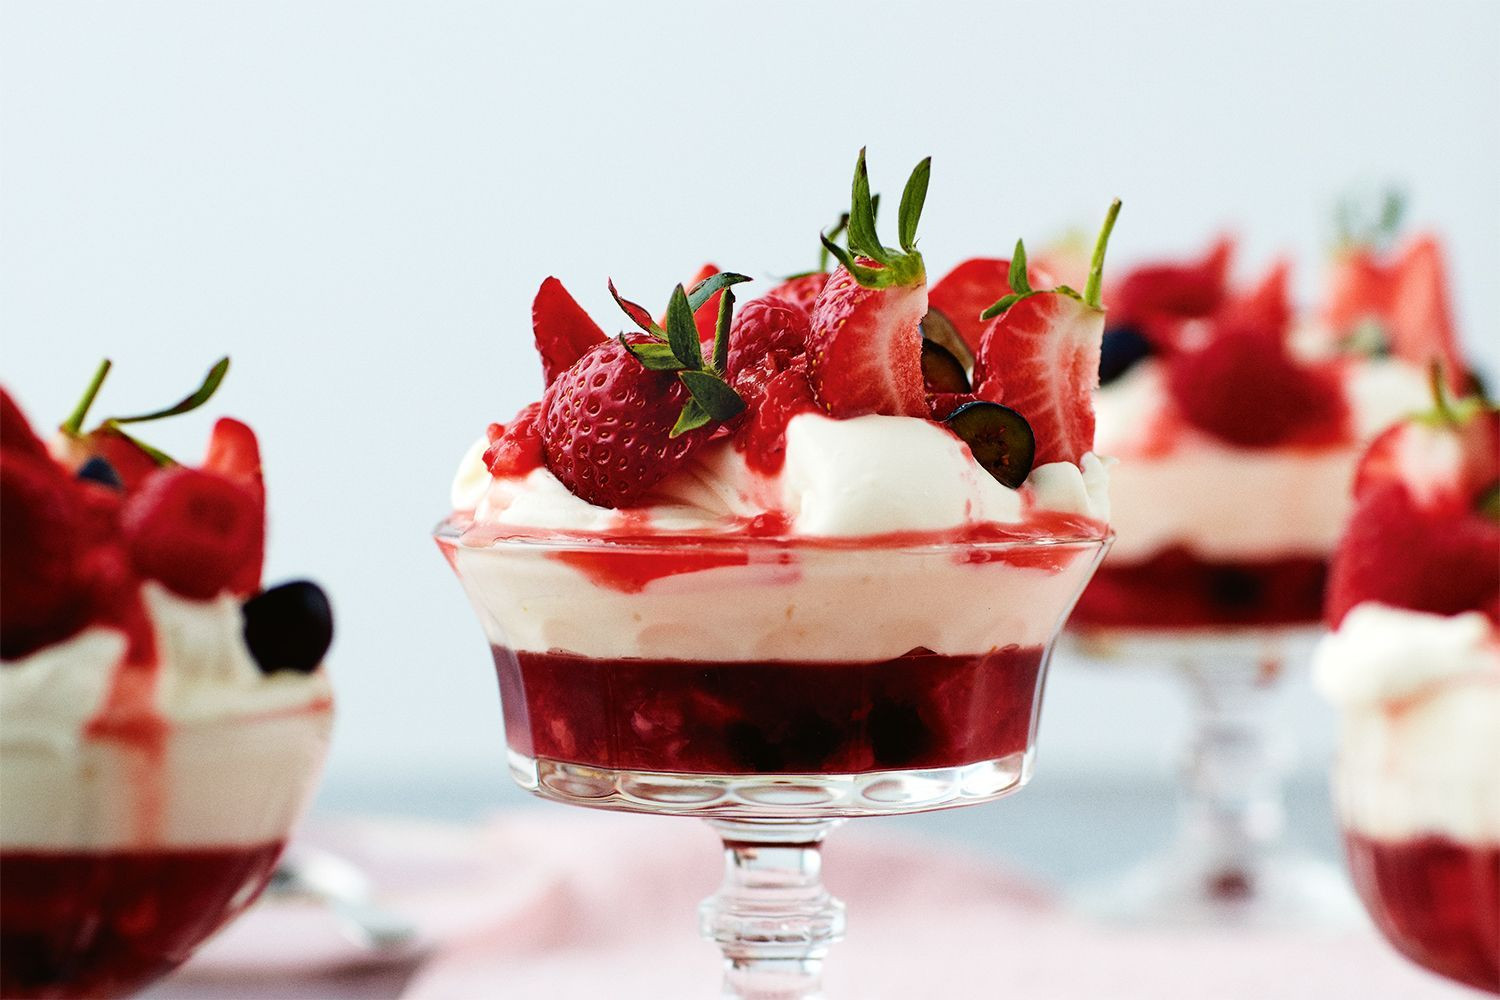 Summer Desserts Jamie Oliver
 41 showstopping trifle recipes to make this Easter